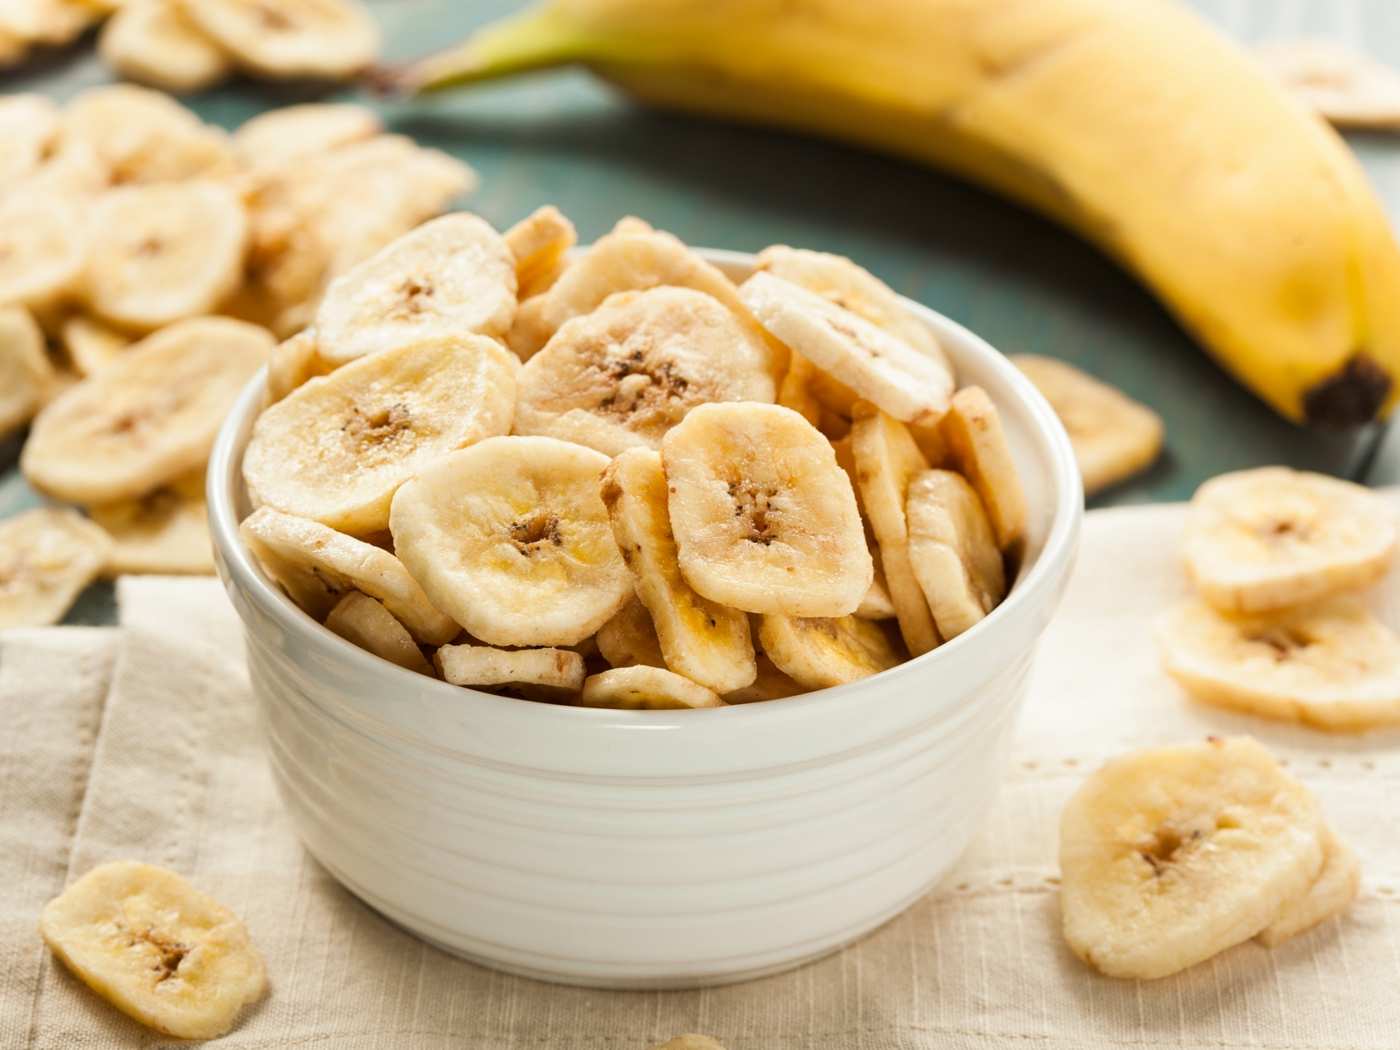 Snack idea with baked bananas as chips for school kids